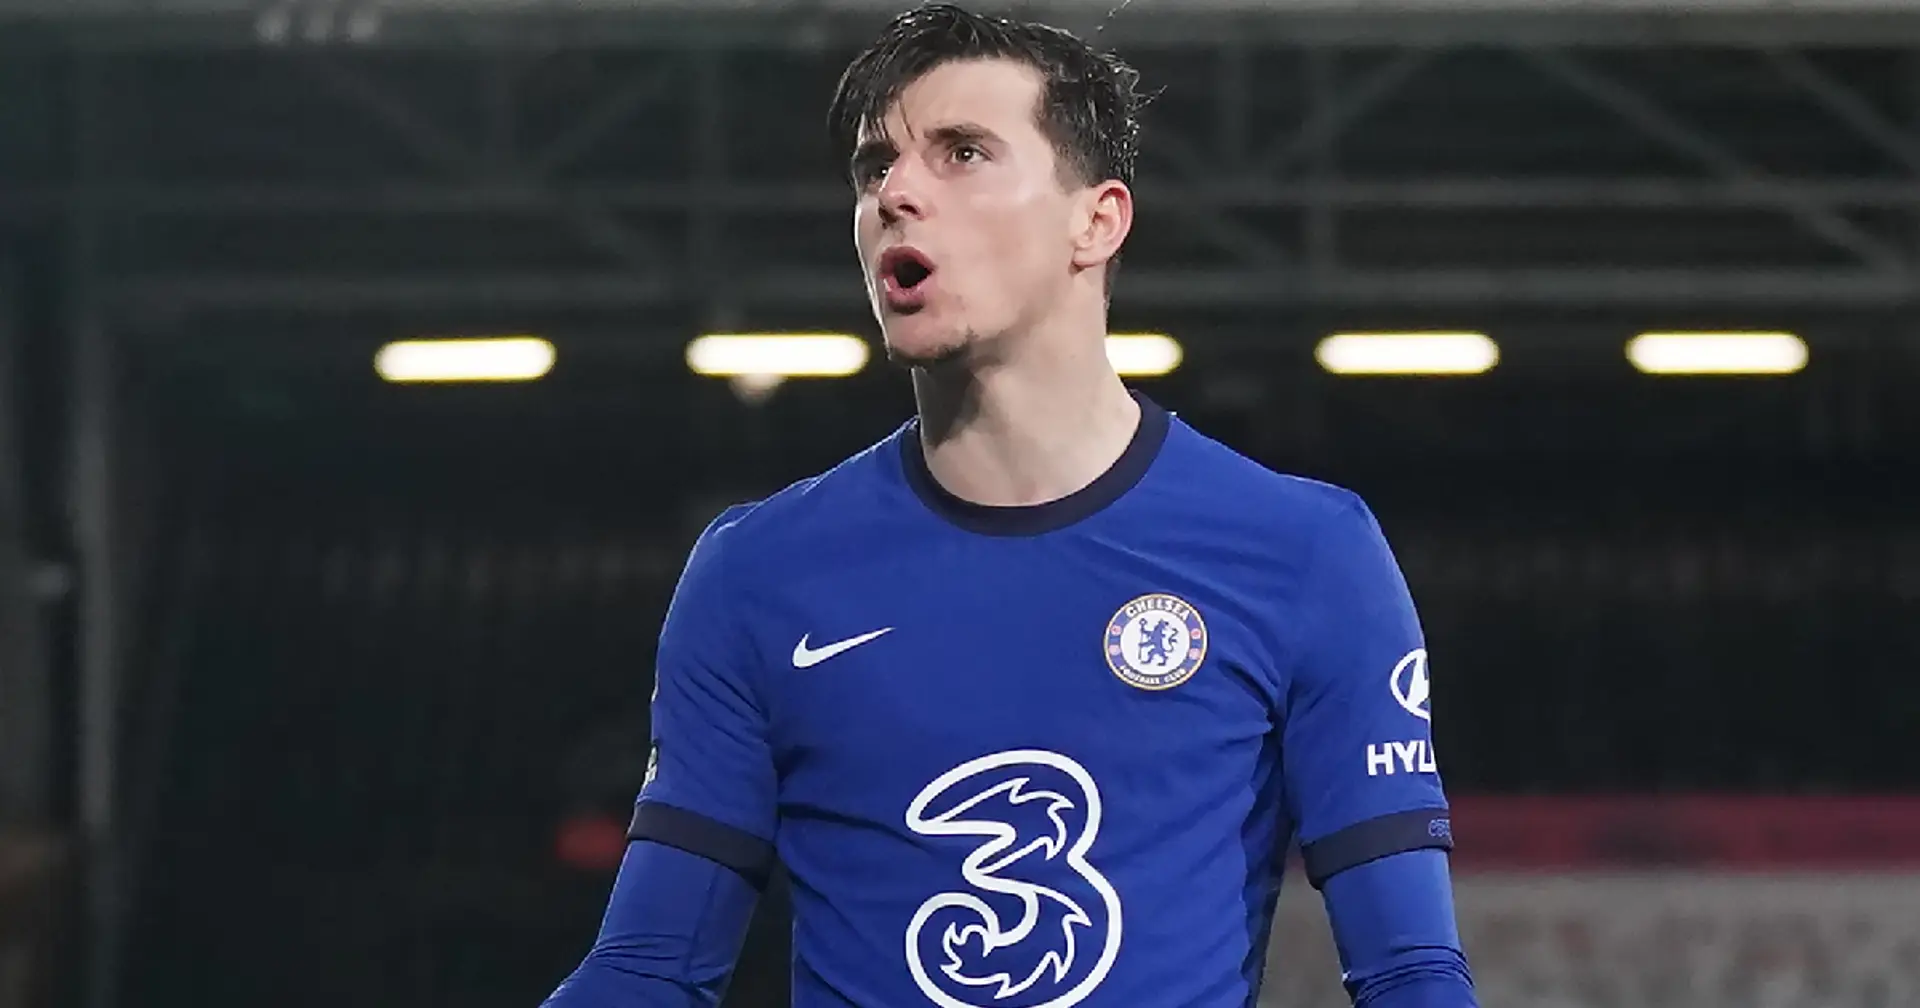 Setting a good example: Mason Mount's classy gesture for Chelsea's youngsters revealed